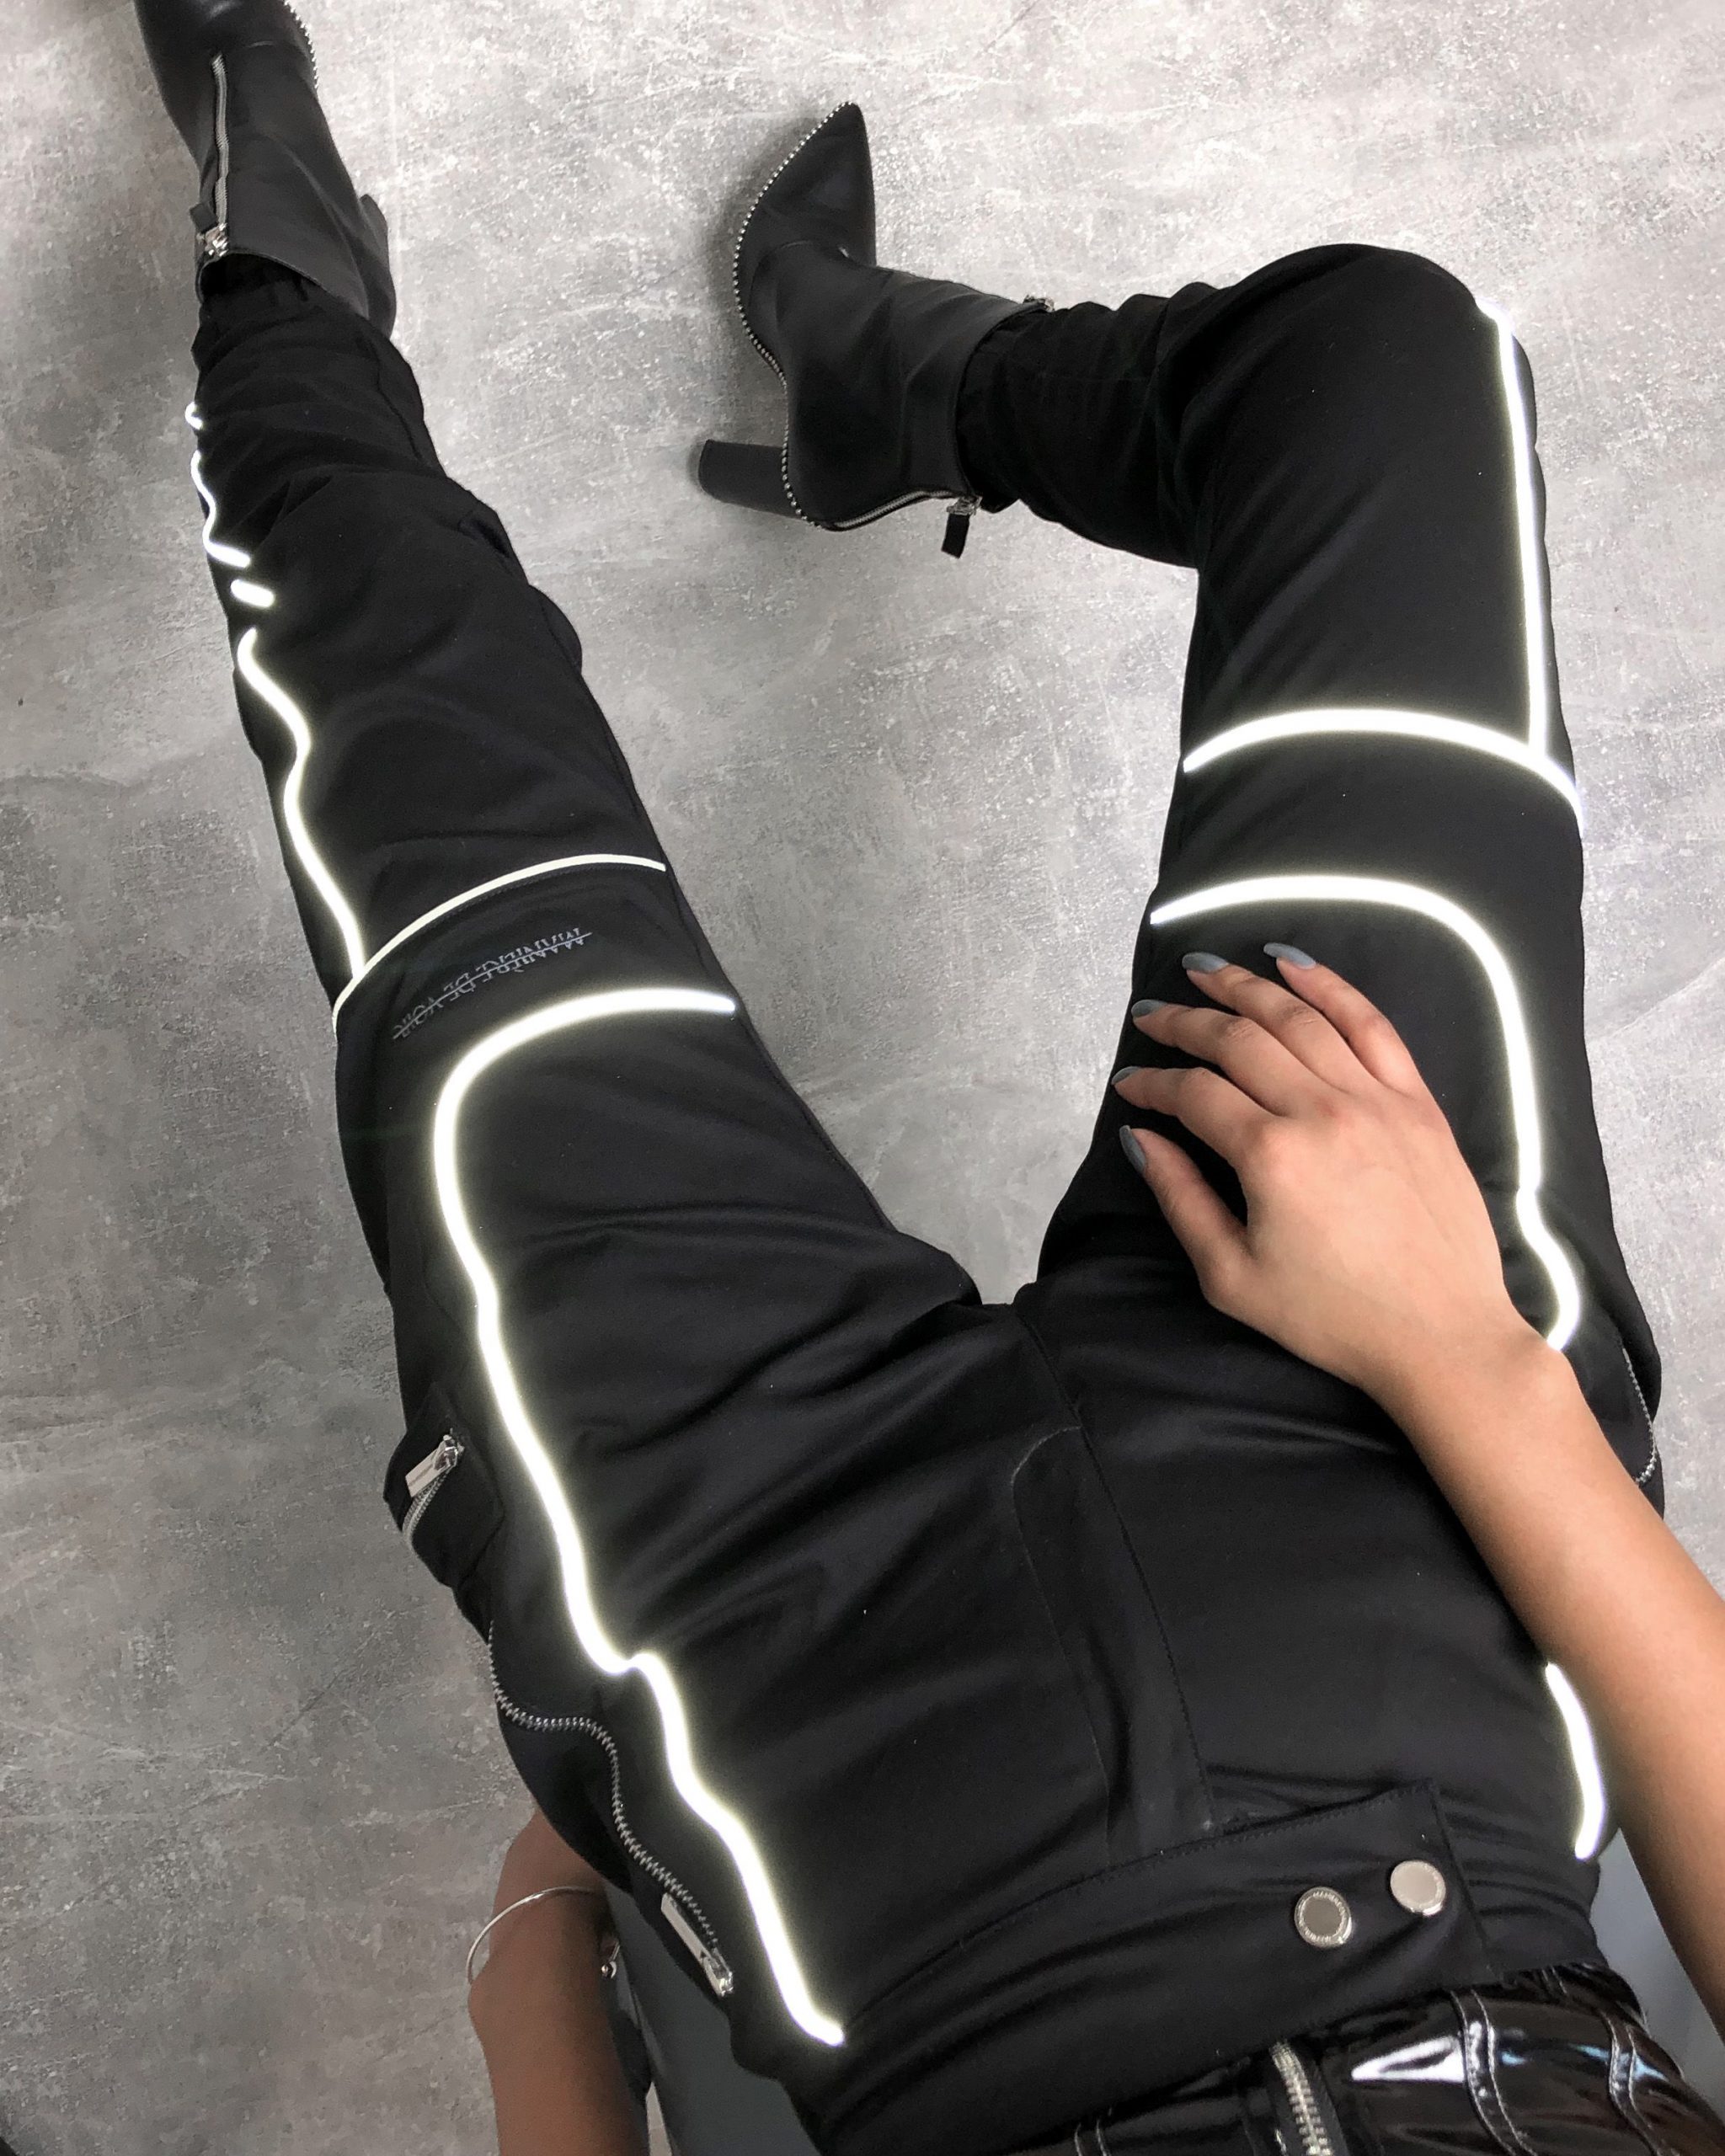 The Reflective Piped Cargo Pants